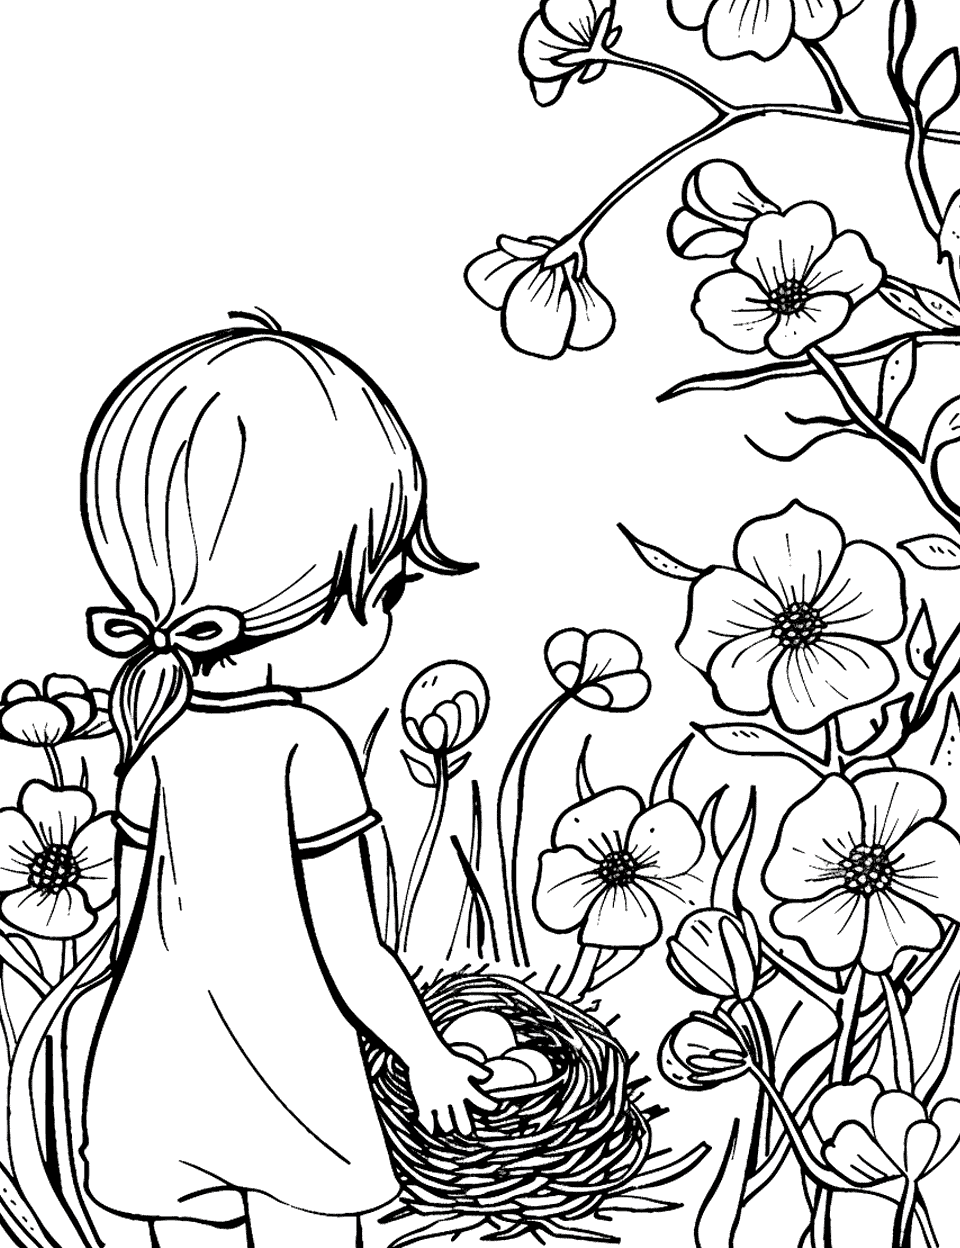 Discovering a Bird’s Nest Garden Coloring Page - A child discovers a bird’s nest in a flowering bush with eggs inside.